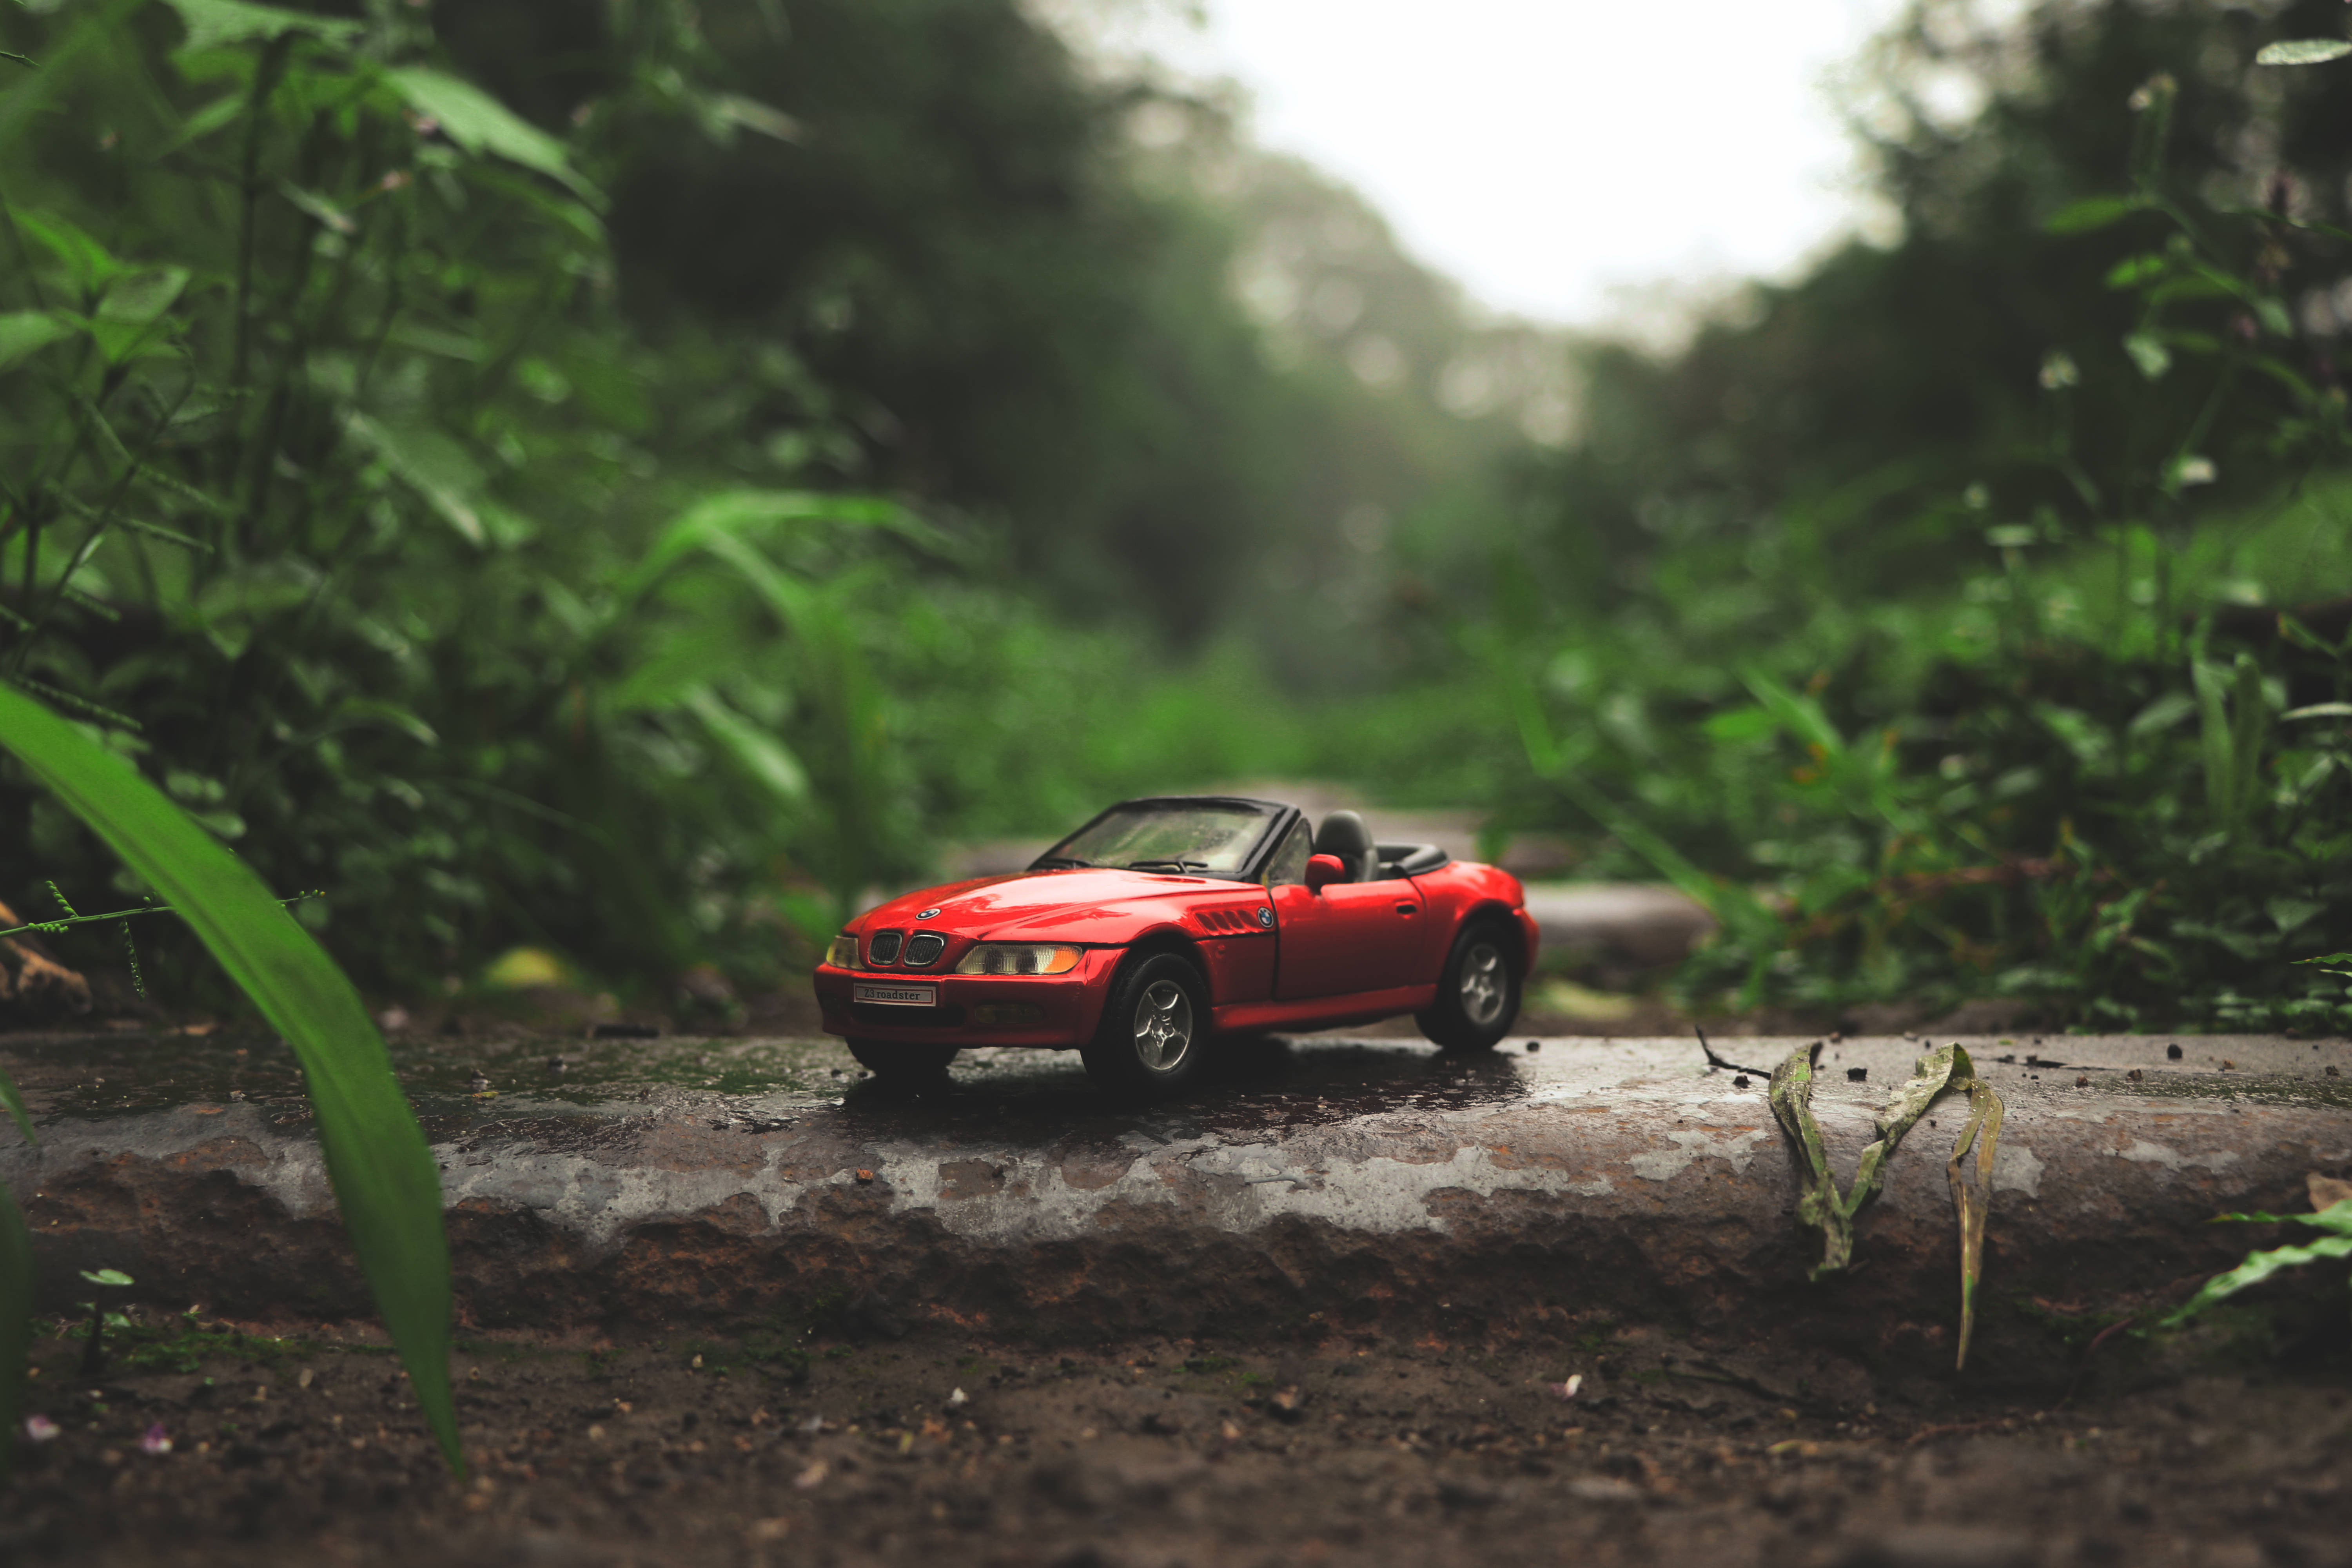 140454 Screensavers and Wallpapers Cabriolet for phone. Download auto, cars, toy, cabriolet, model pictures for free